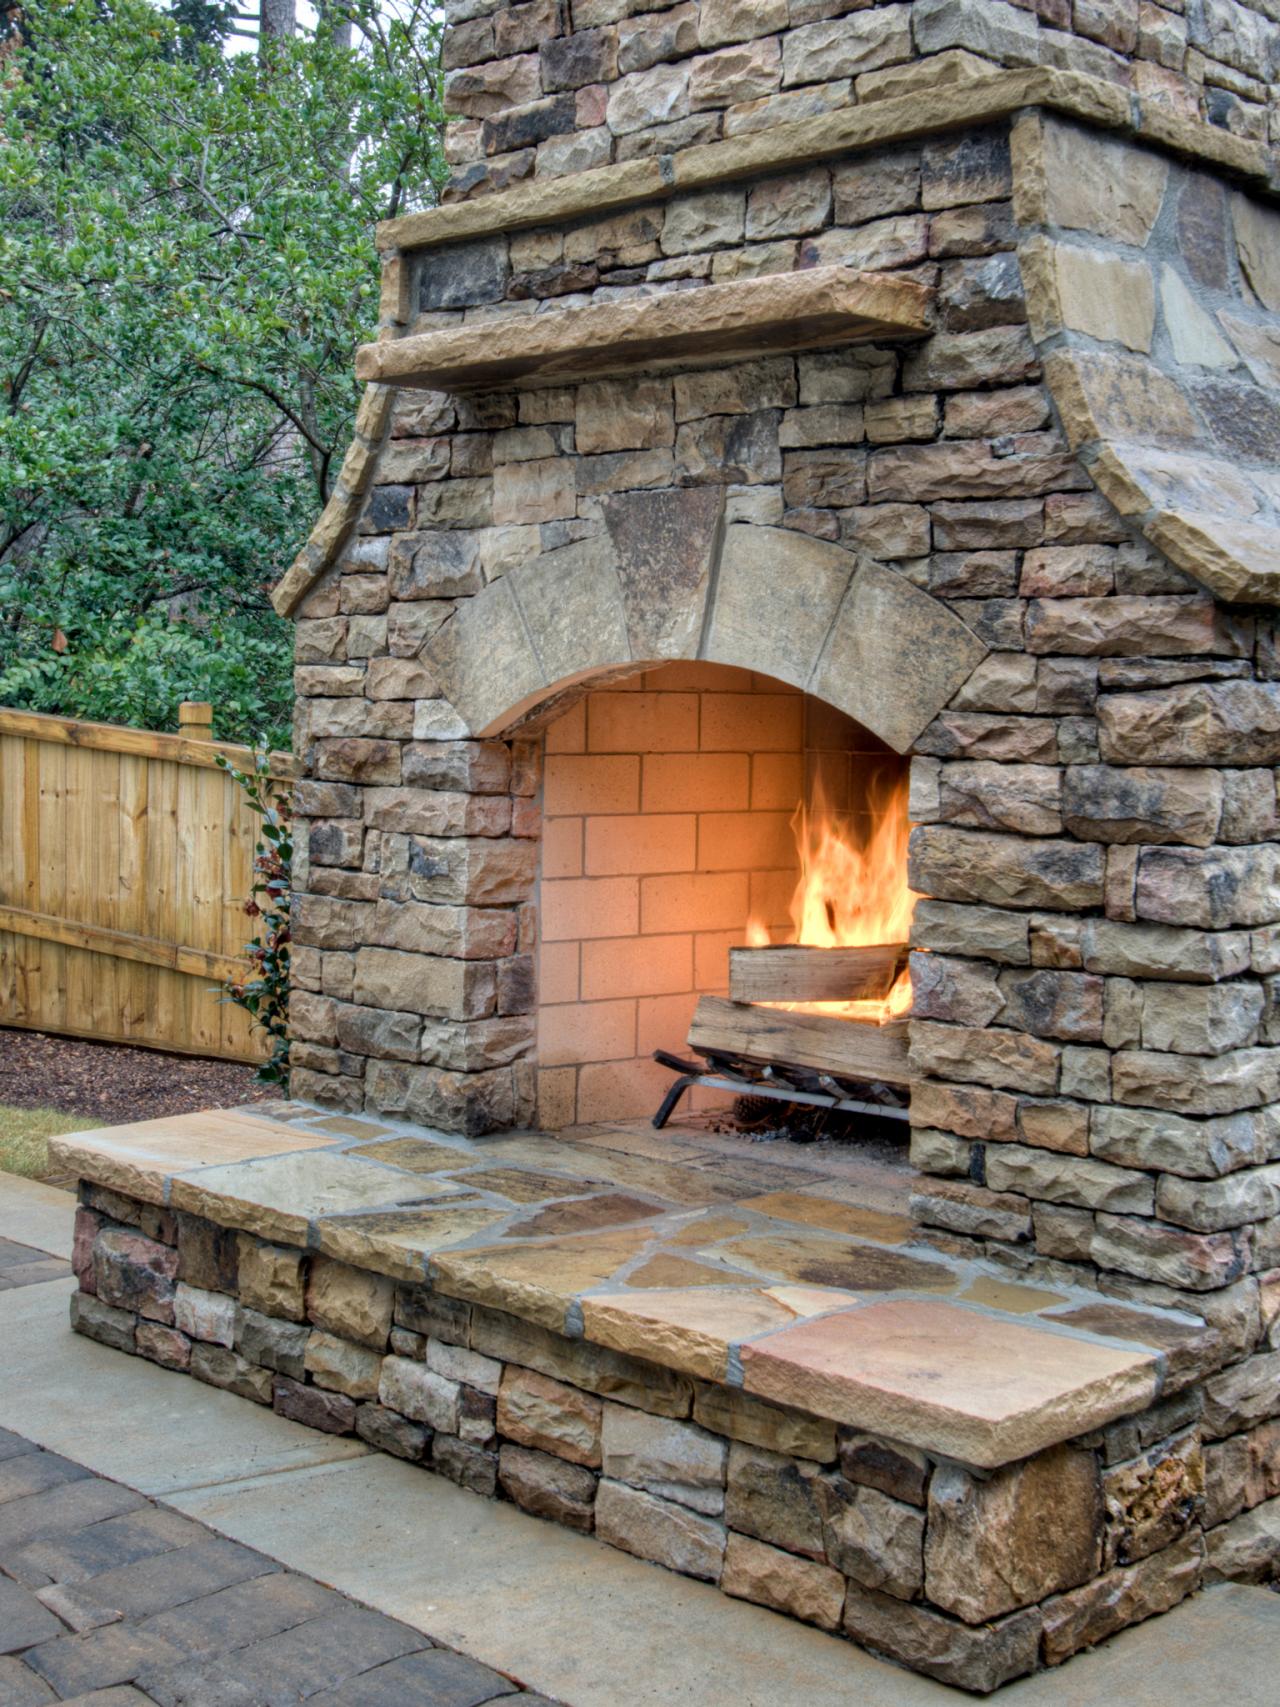 How To Build An Outdoor Fireplace, What Kind Of Brick To Use For Outdoor Fireplaces